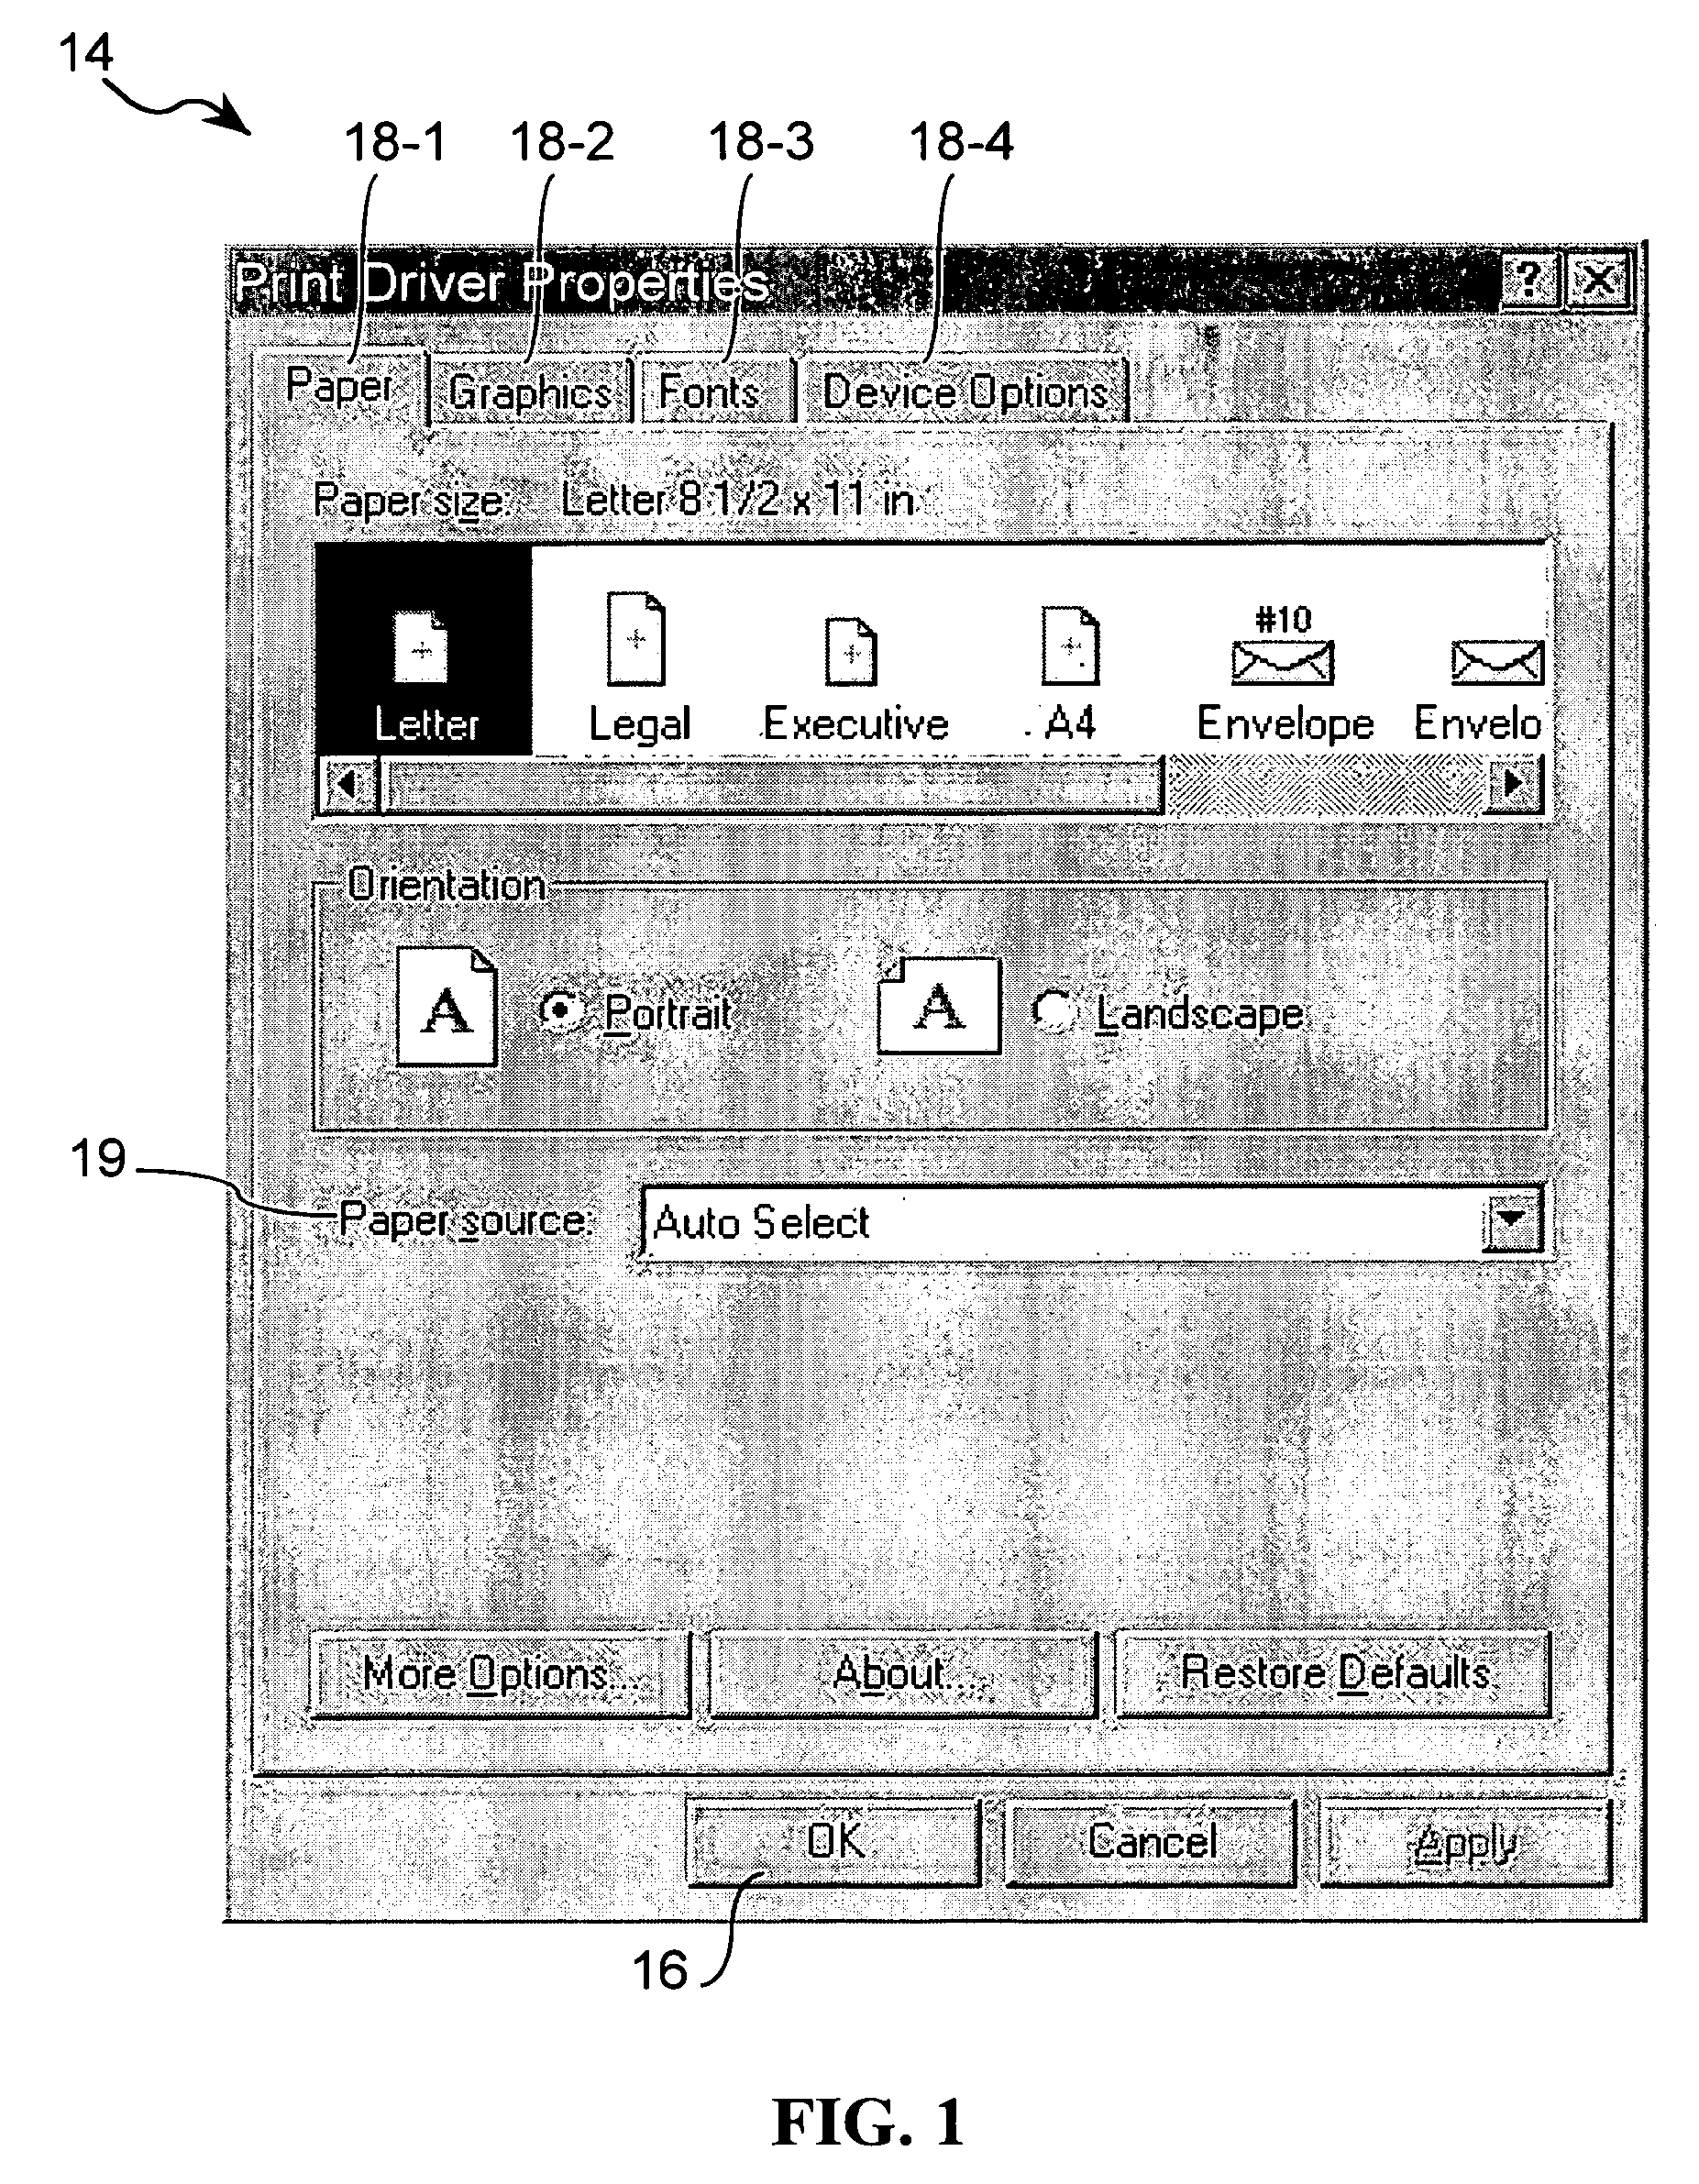 Apparatus and method for automated testing of print drivers in a computer system